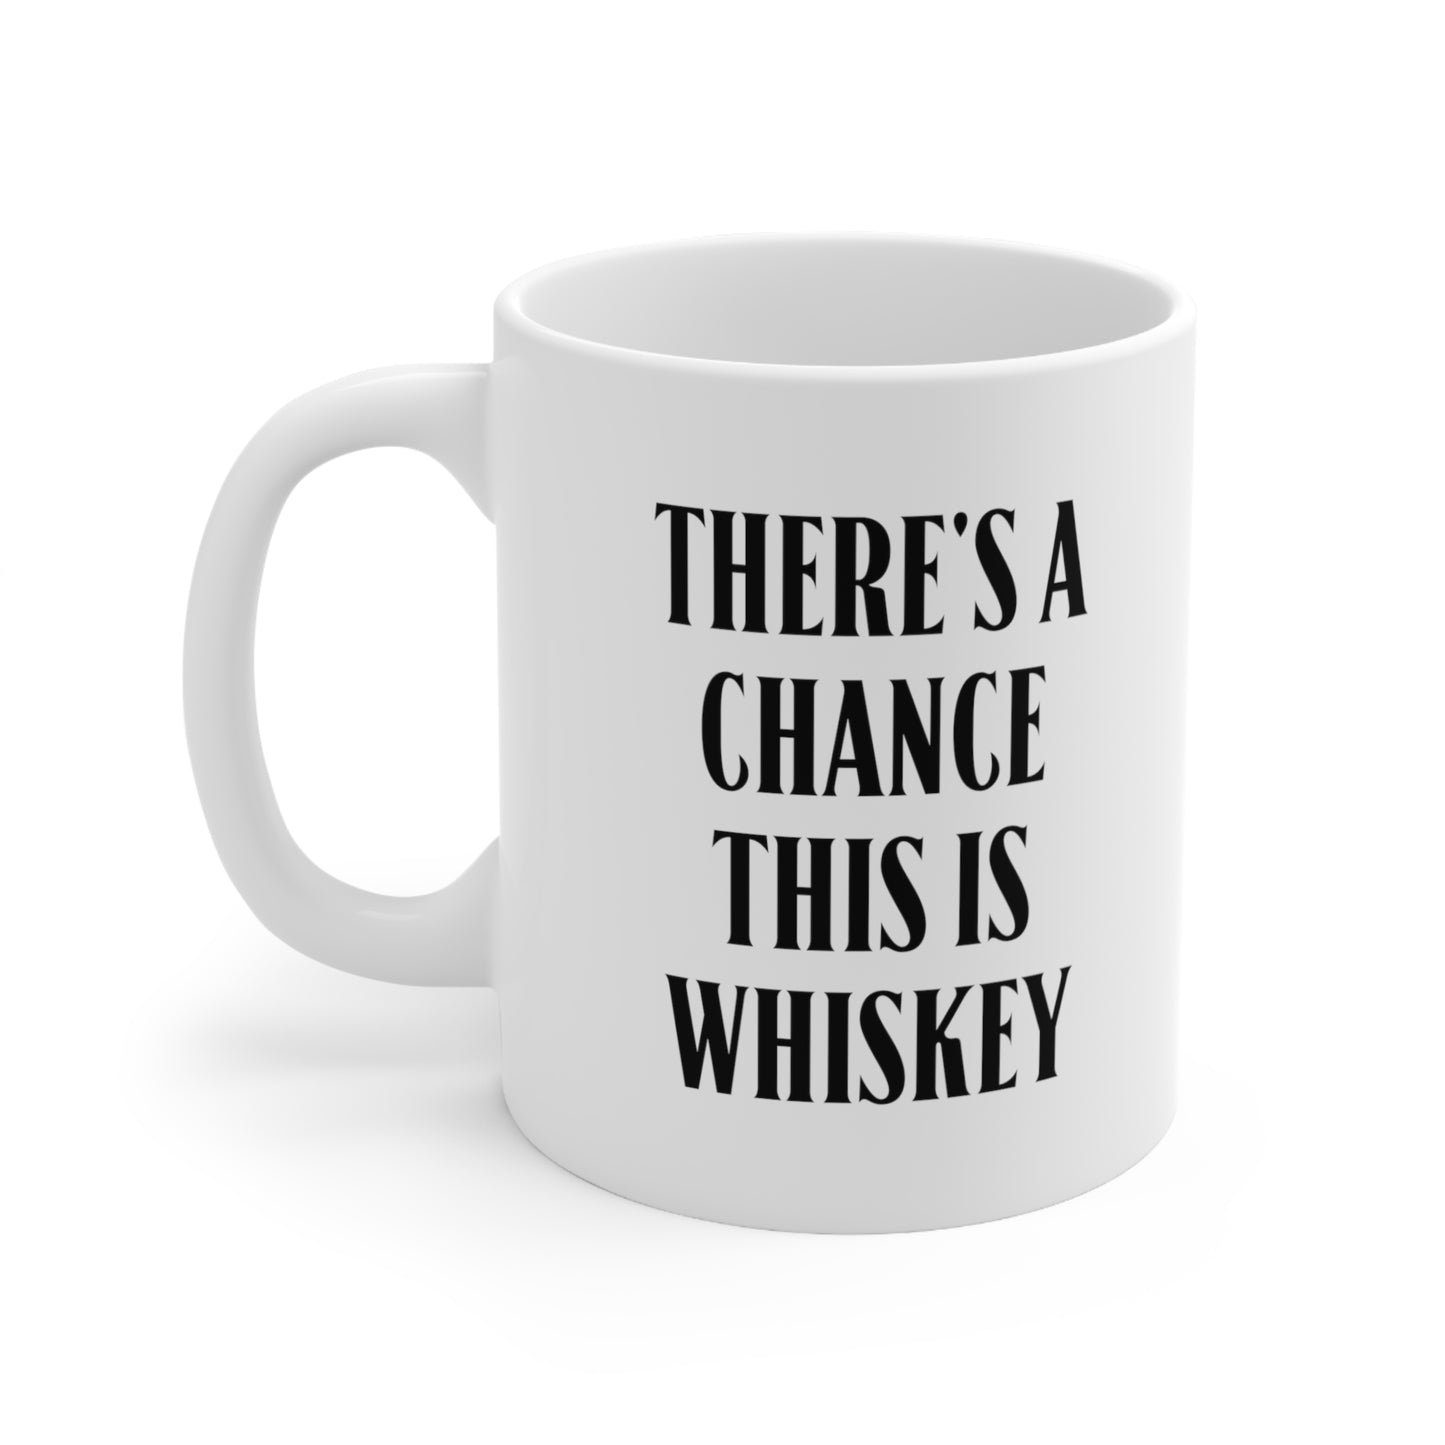 There's a chance this is whiskey Coffee Mug